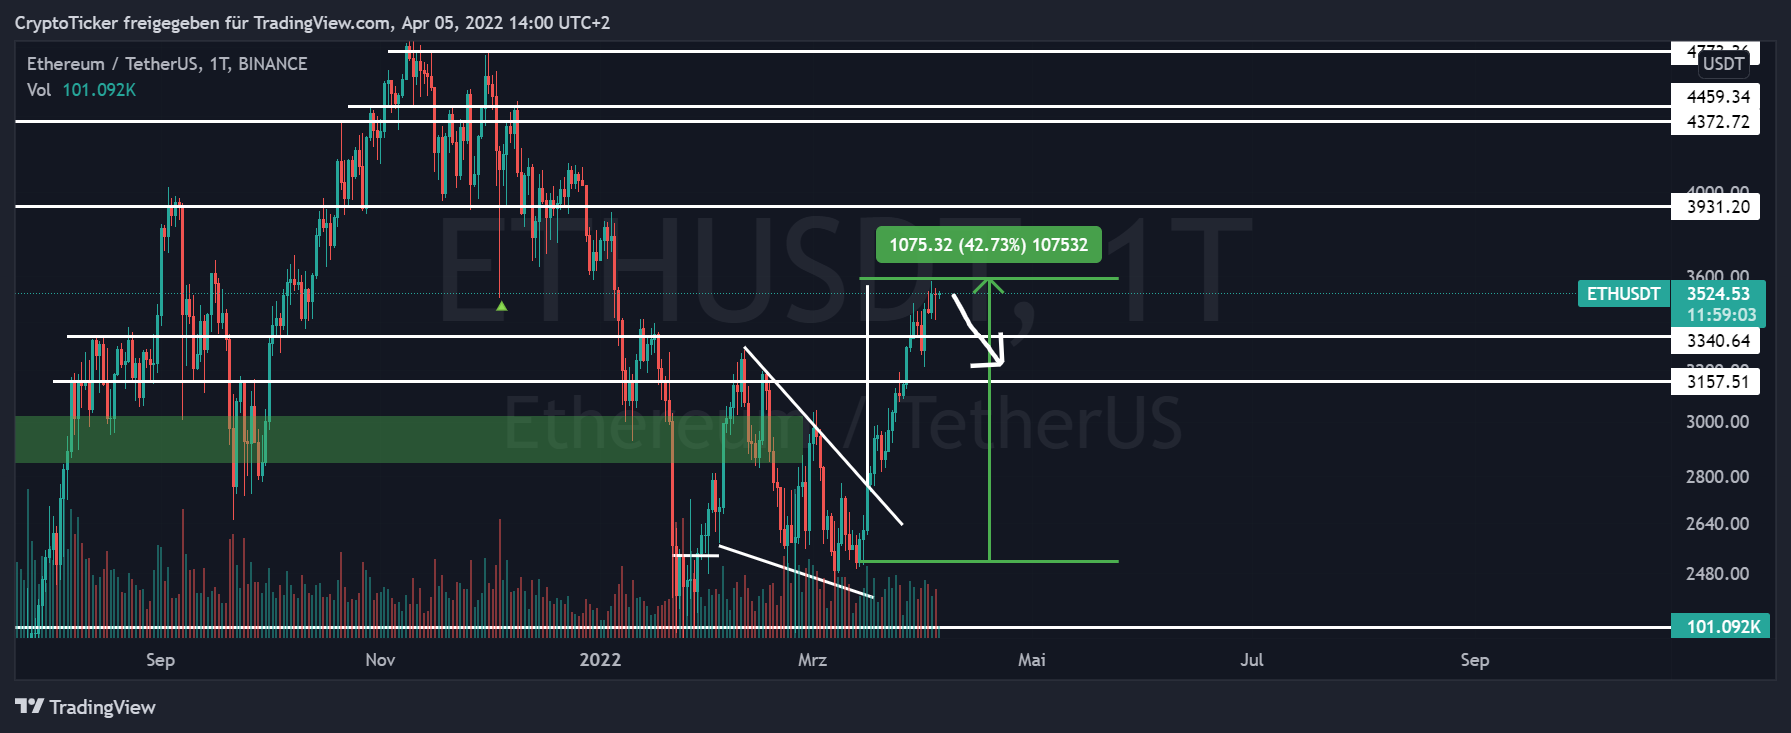 Ethereum price prediction: ETH/USDT 1-day chart showing the potential retracement of ETH